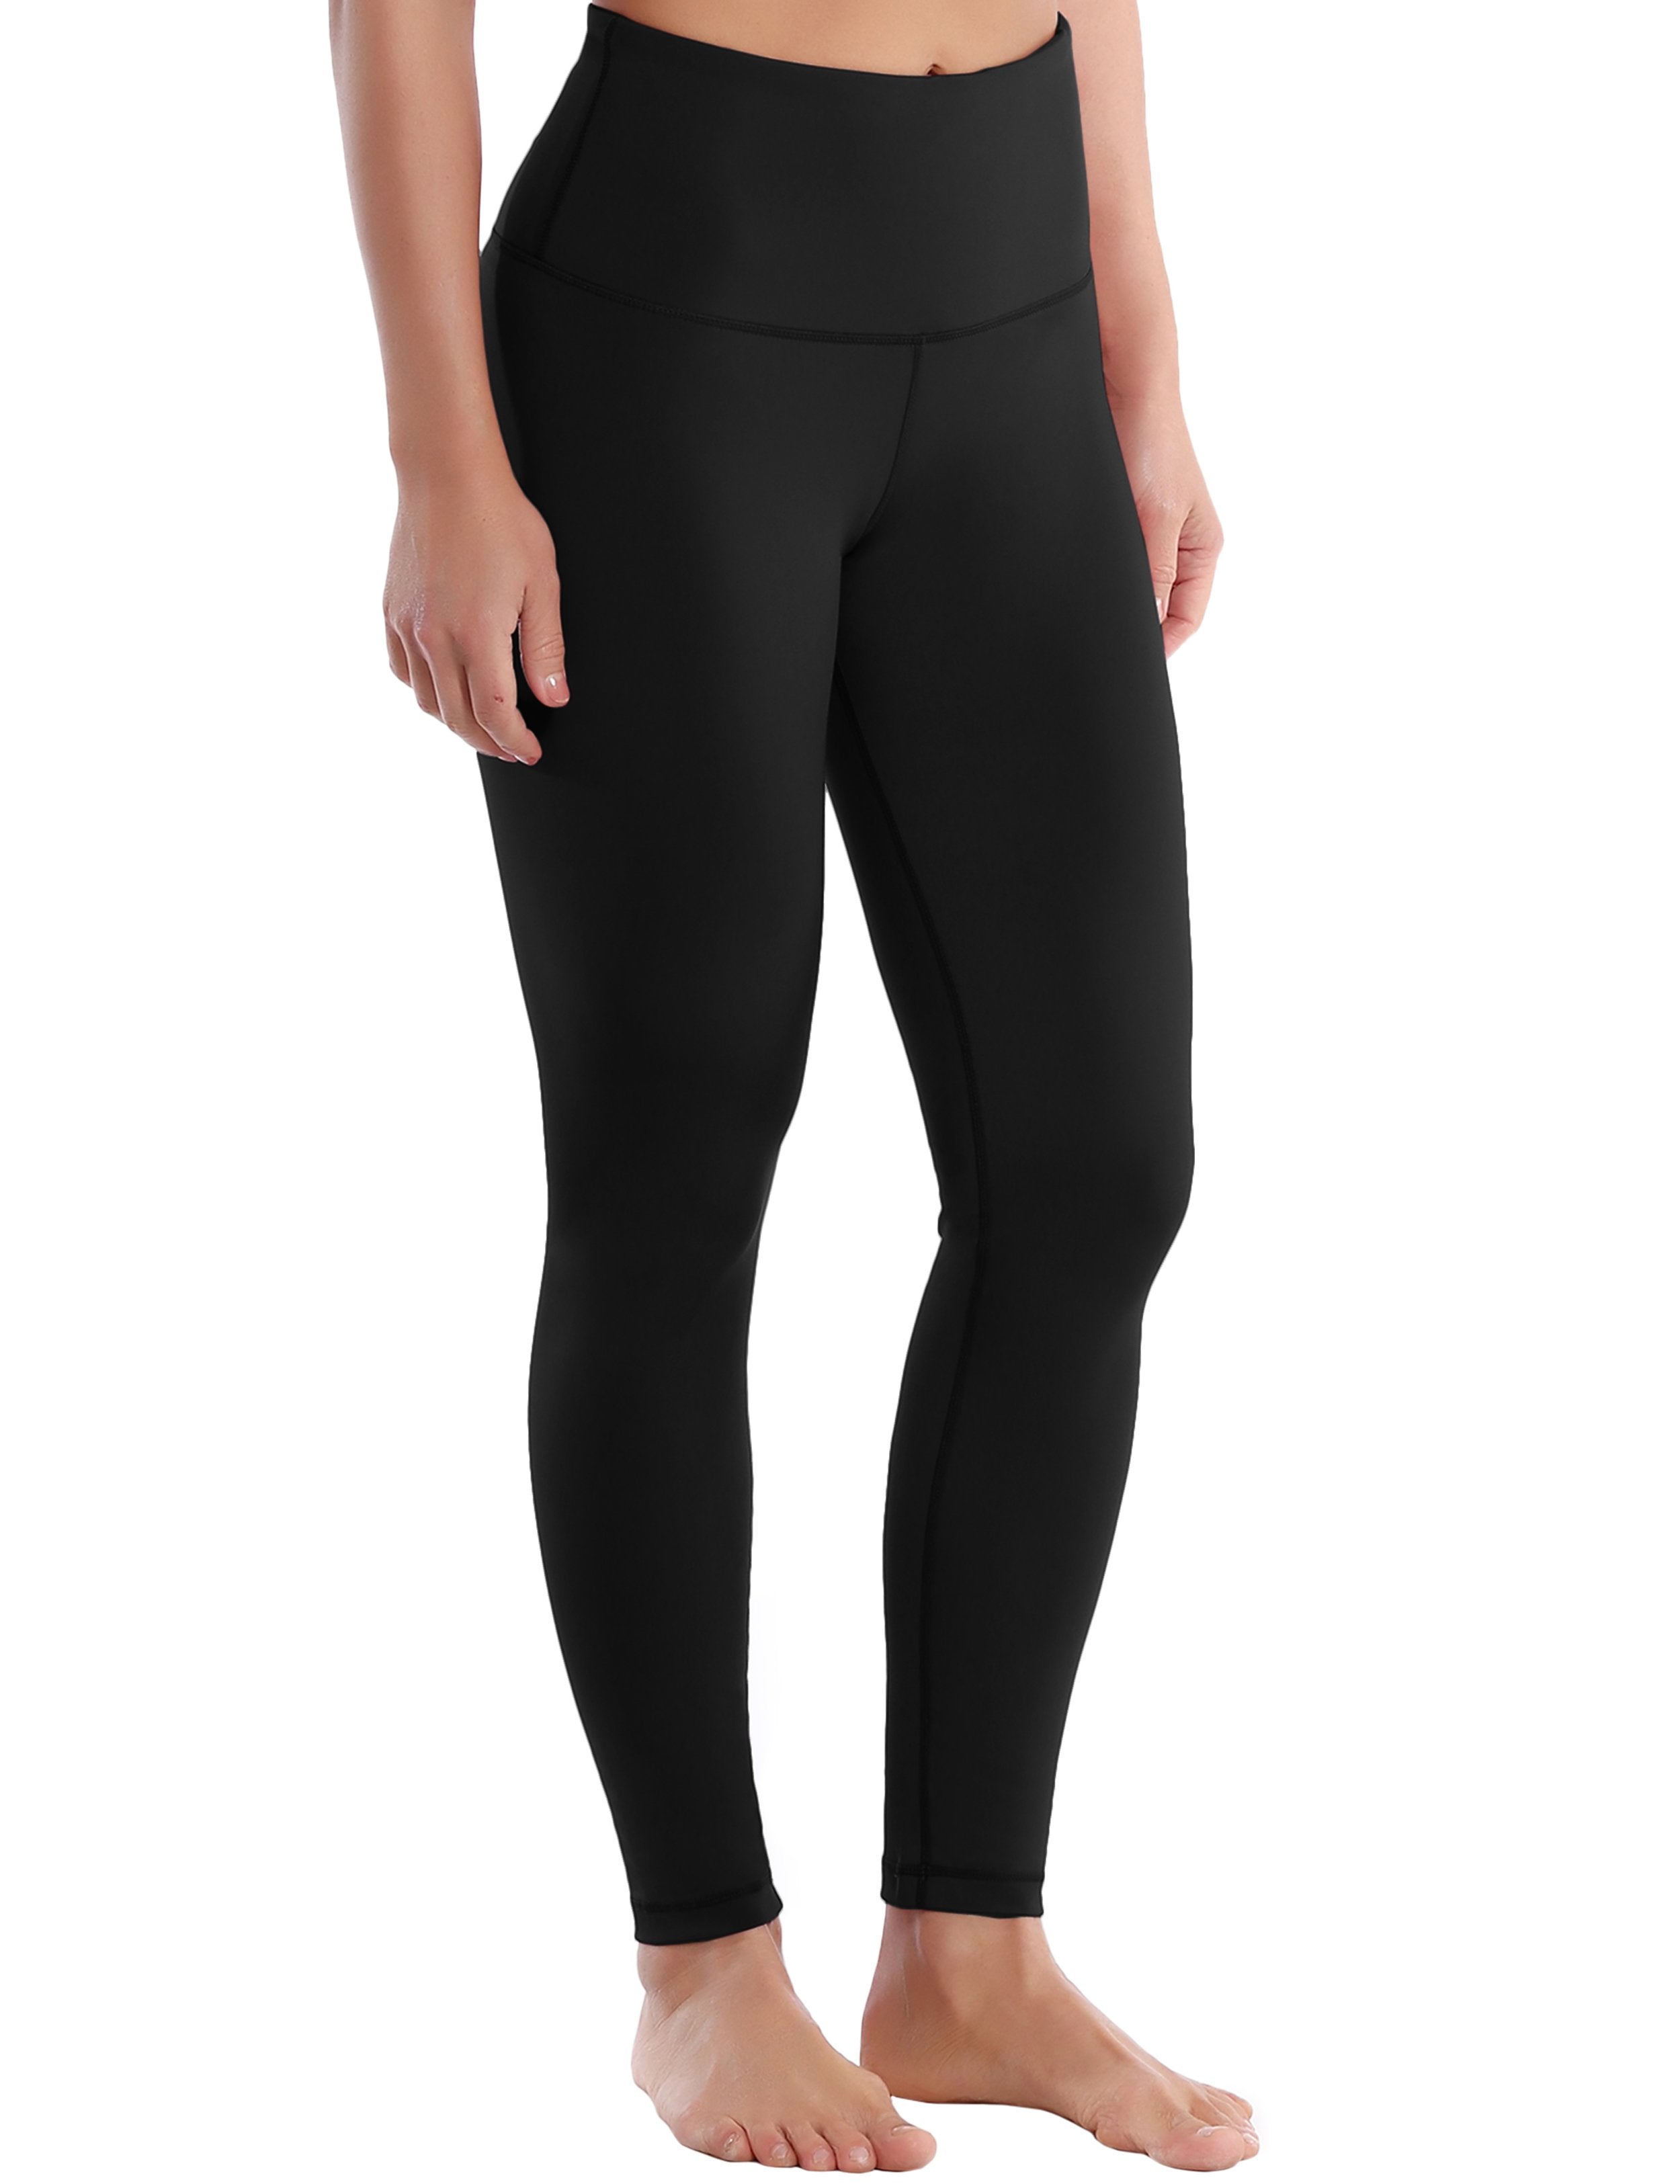 High Waist Golf Pants black 75%Nylon/25%Spandex Fabric doesn't attract lint easily 4-way stretch No see-through Moisture-wicking Tummy control Inner pocket Four lengths